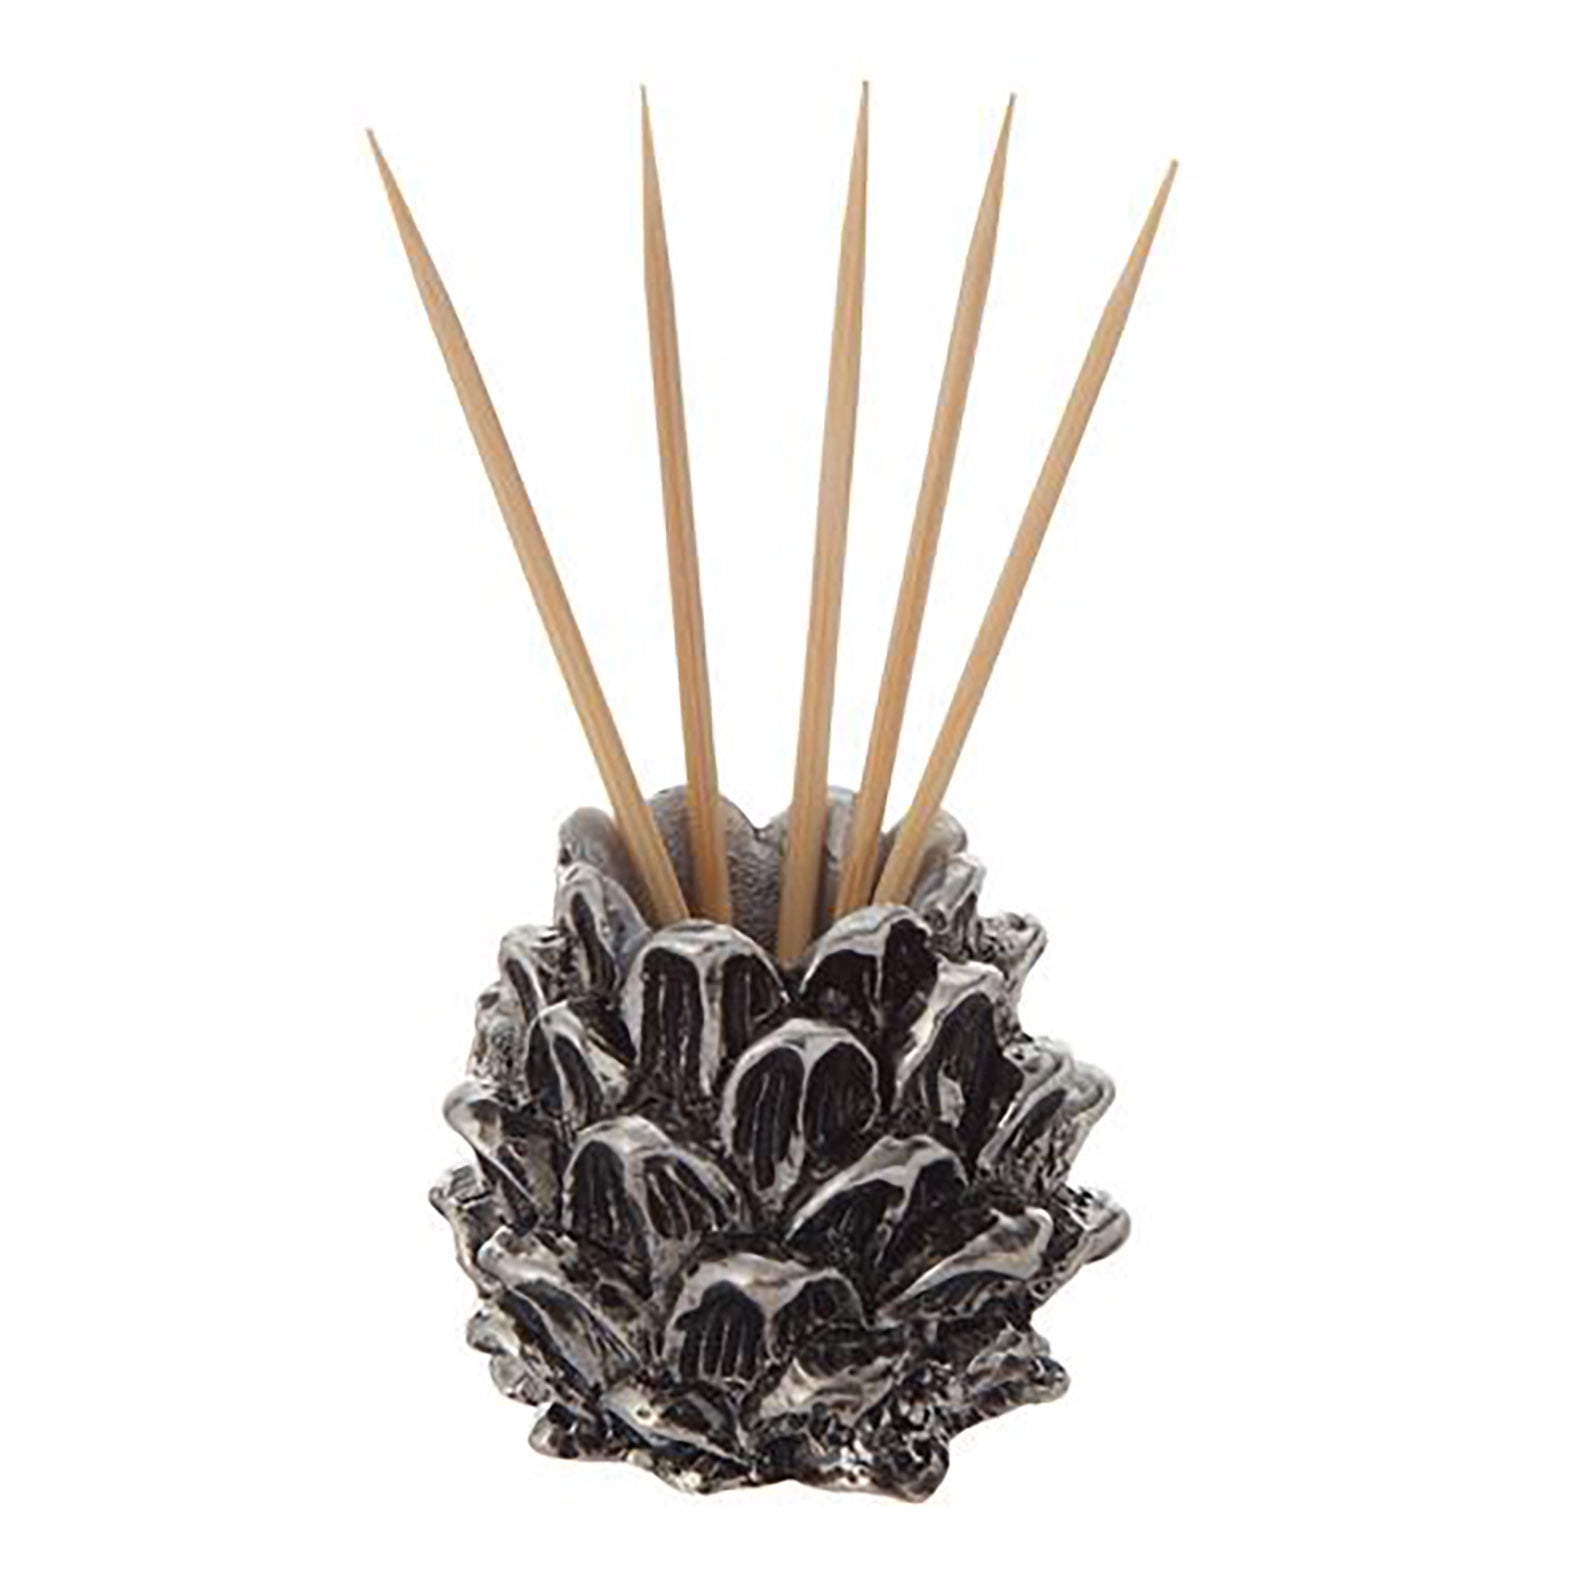 Pinecone Natural Brown 1 inch Pewter Christmas Toothpick Holder With Toothpicks 